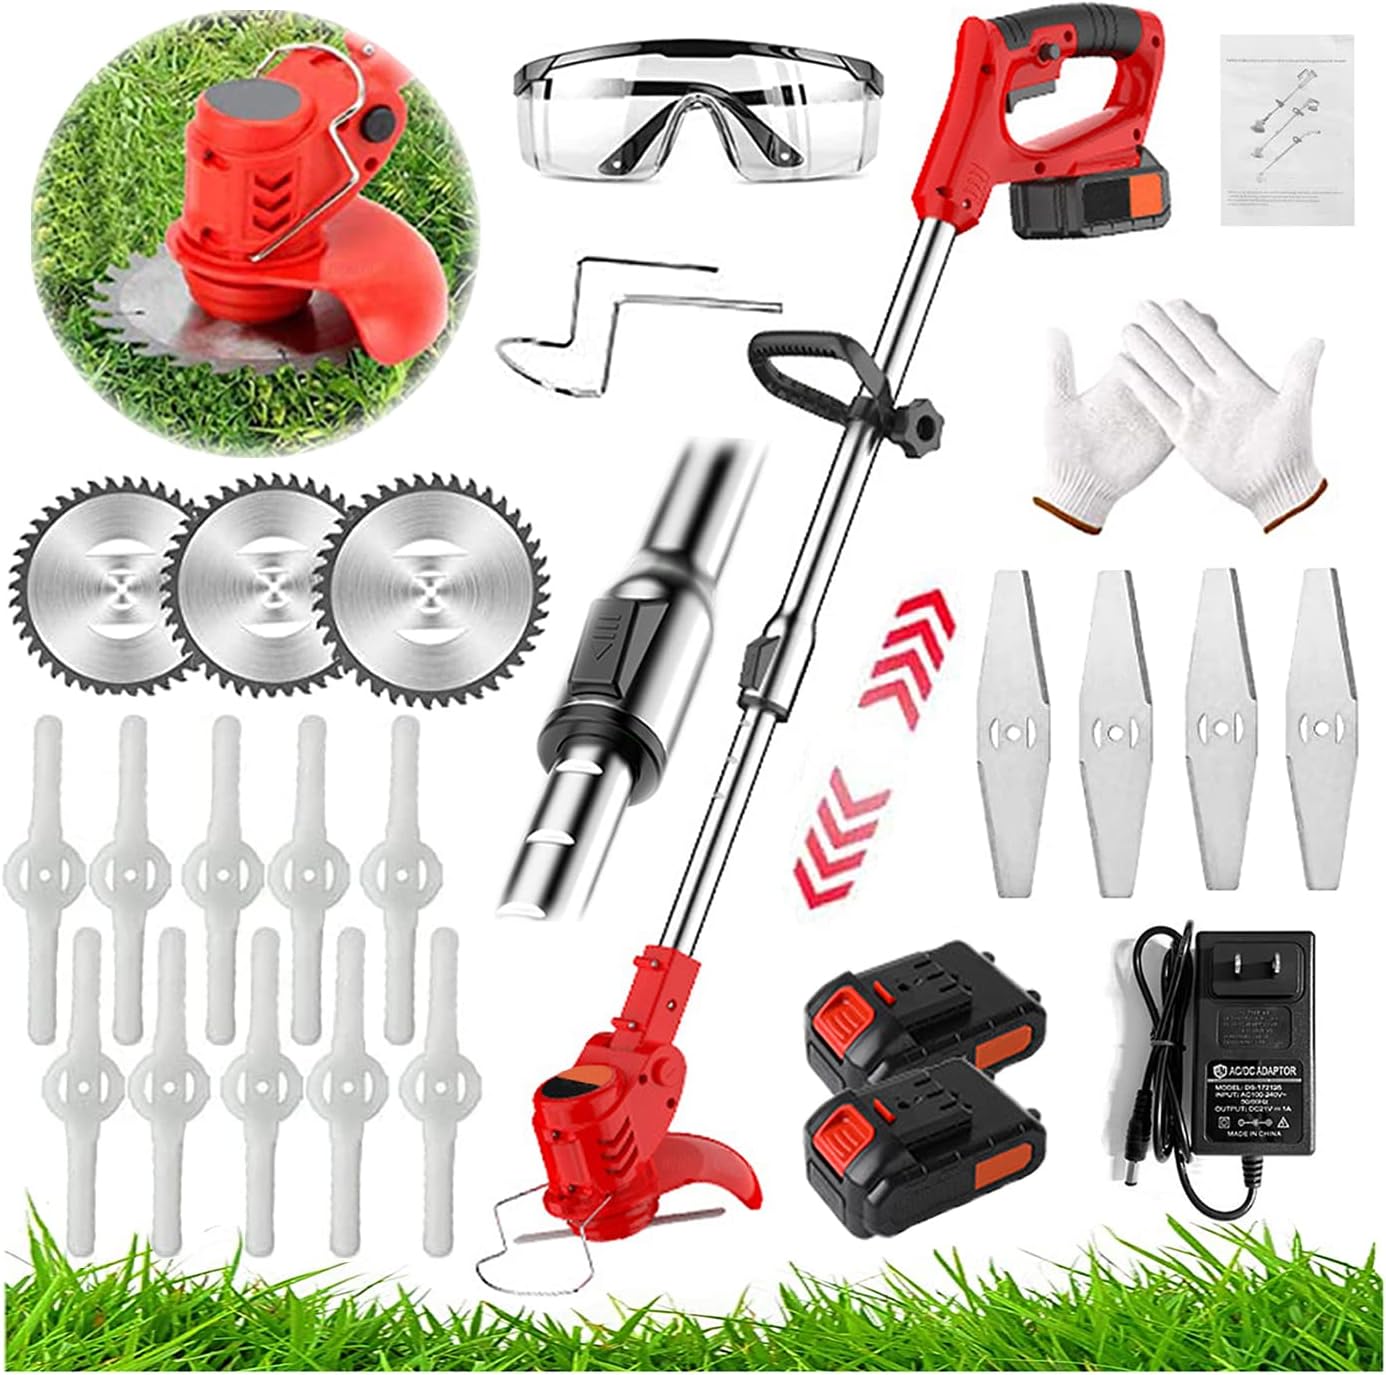 Battery Powered Weed Eater Edger Lawn Tool Cordless [...]